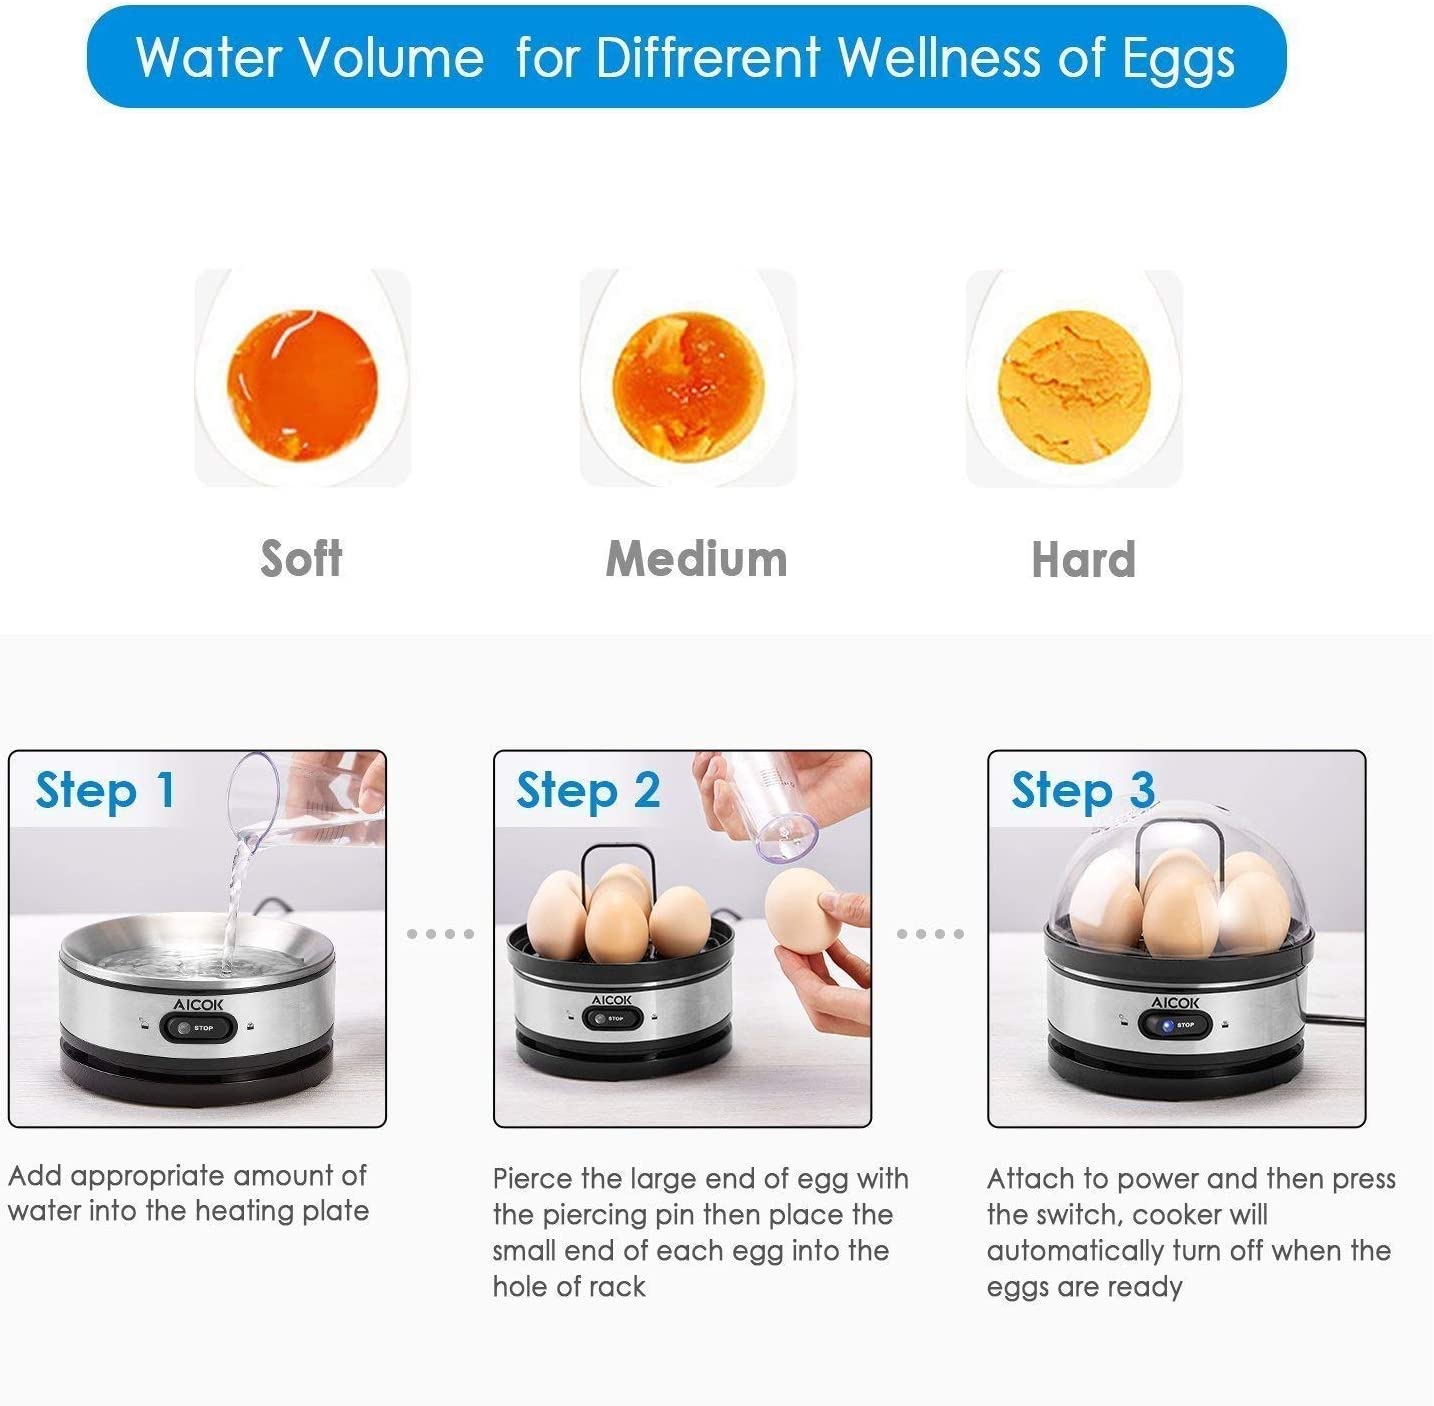 Electric Rapid Stainless Steel 7 Egg cooker Auto Shut Off